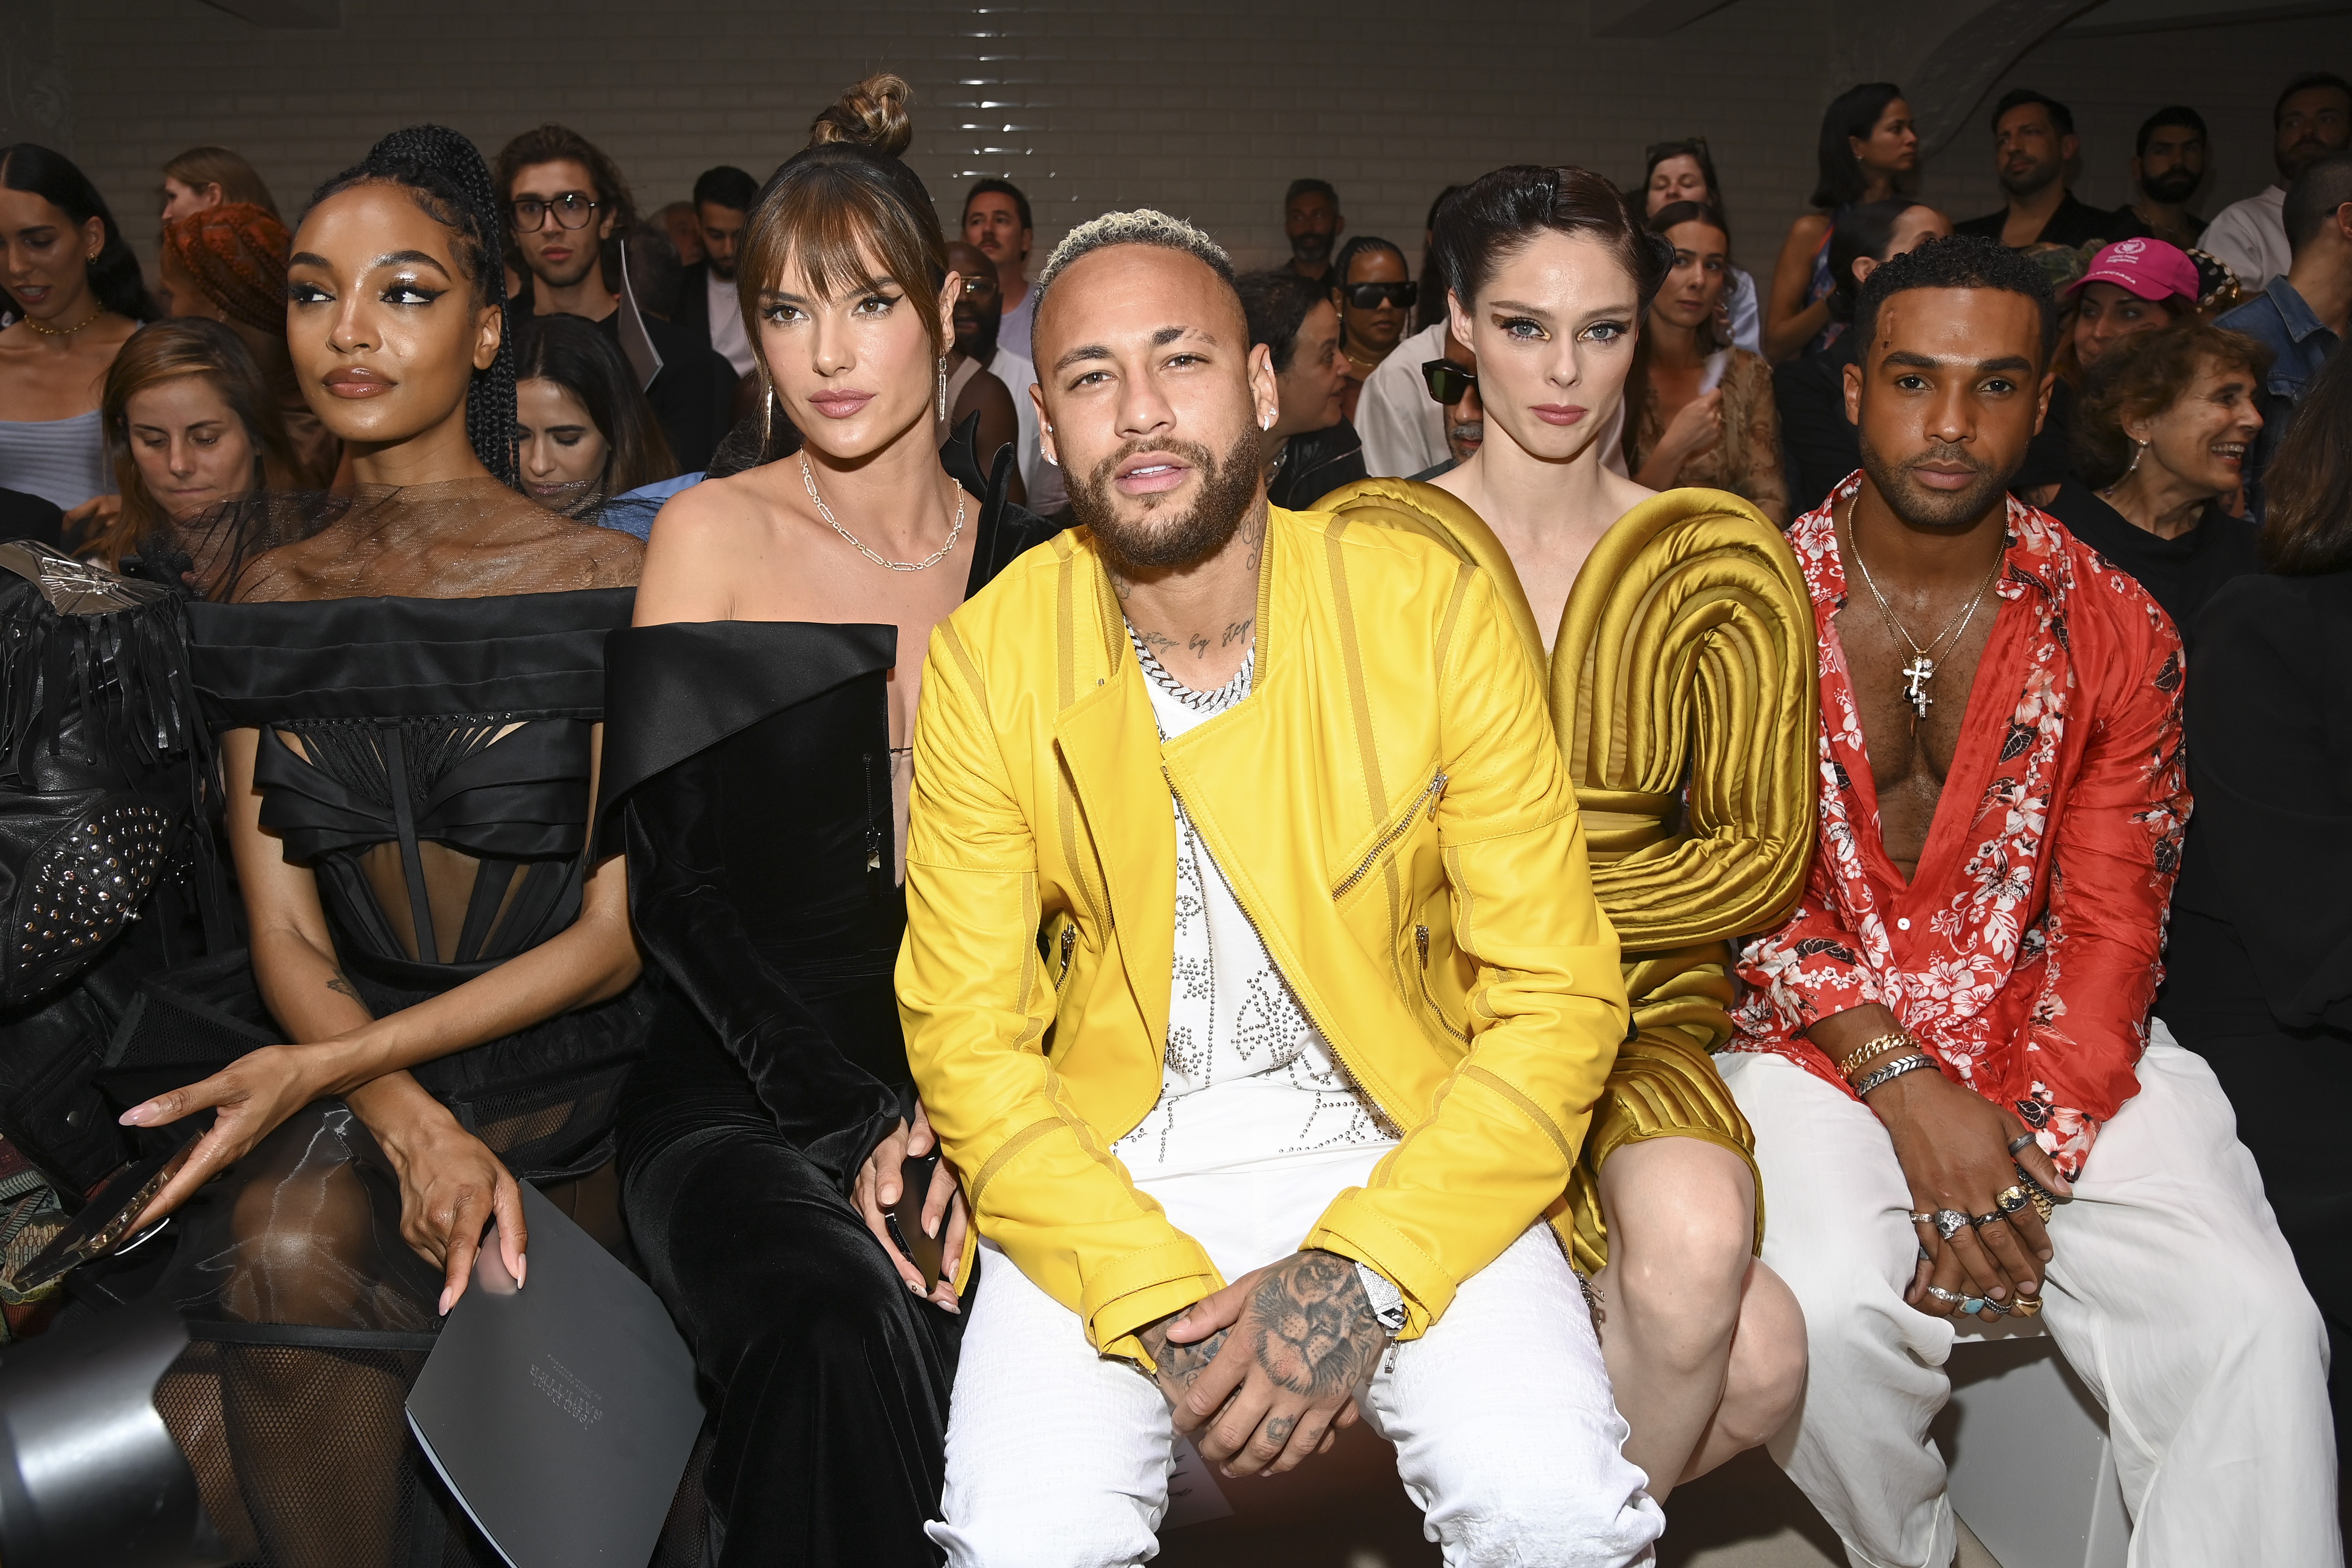 PARIS, FRANCE - JULY 06: (EDITORIAL USE ONLY - For Non-Editorial use please seek approval from Fashion House) (L-R) Jourdan Dunn, Alessandra Ambrosio, Neymar, Coco Rocha and Lucien attend the Jean-Paul Gaultier Haute Couture Fall Winter 2022 2023 show as  (Foto: Getty Images)